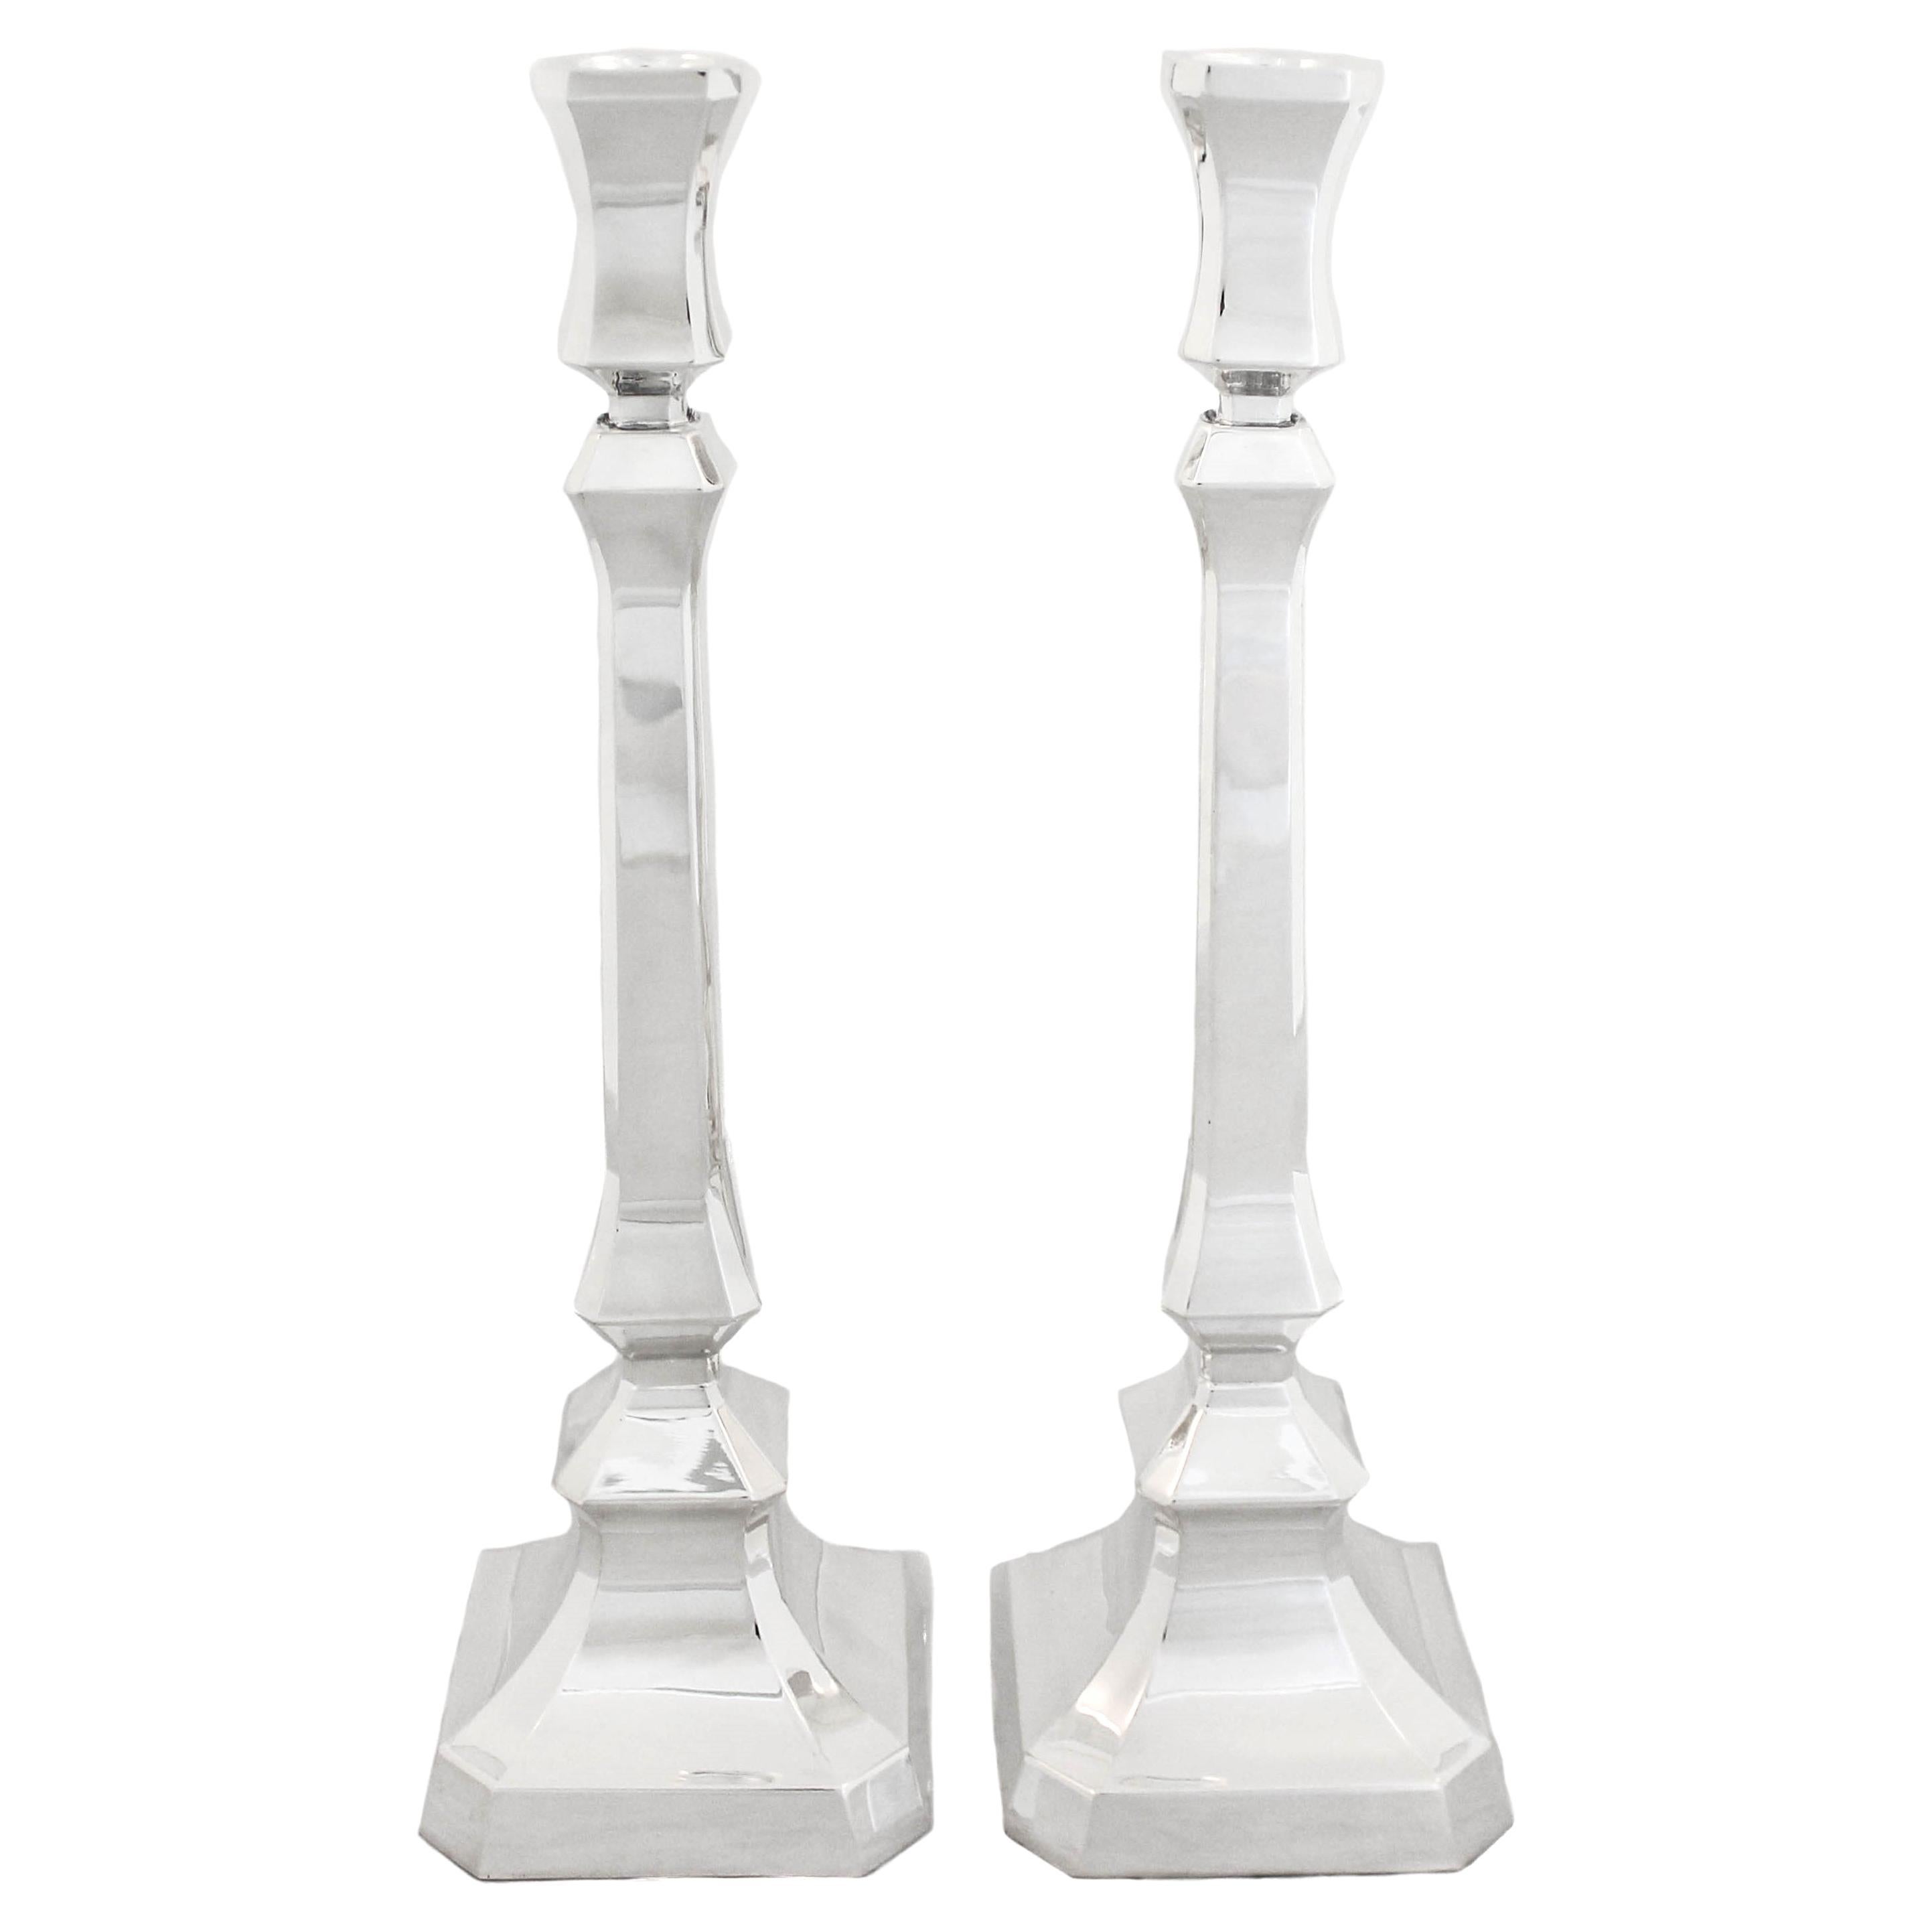 Sterling Silver Candlesticks For Sale